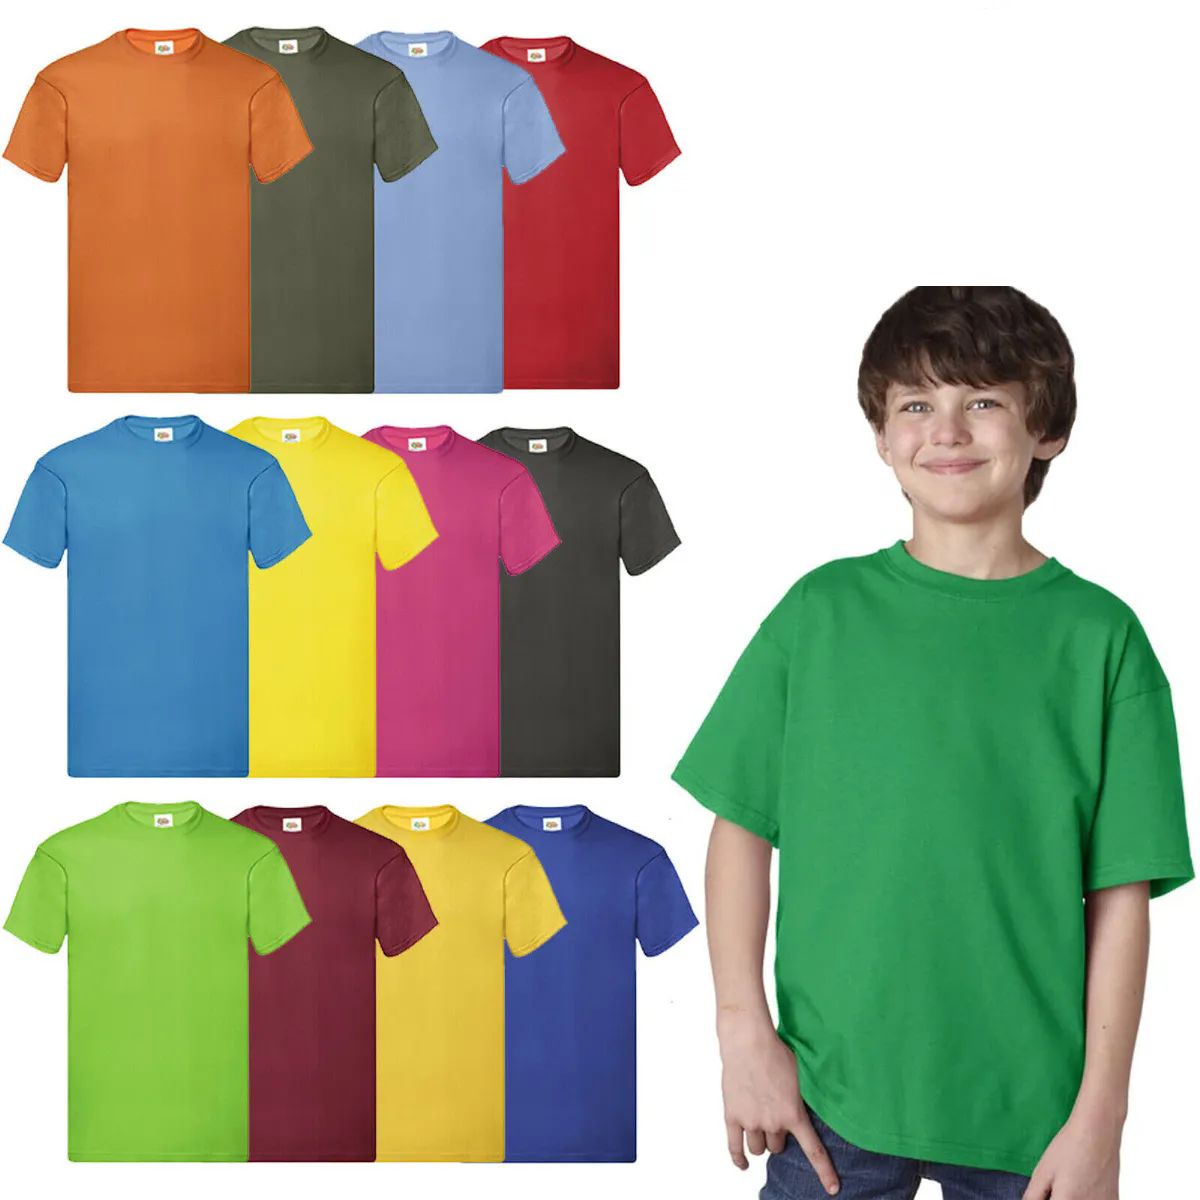 360 Pieces of Billion Hats Kids Youth Cotton Assorted Colors T Shirts Size xs